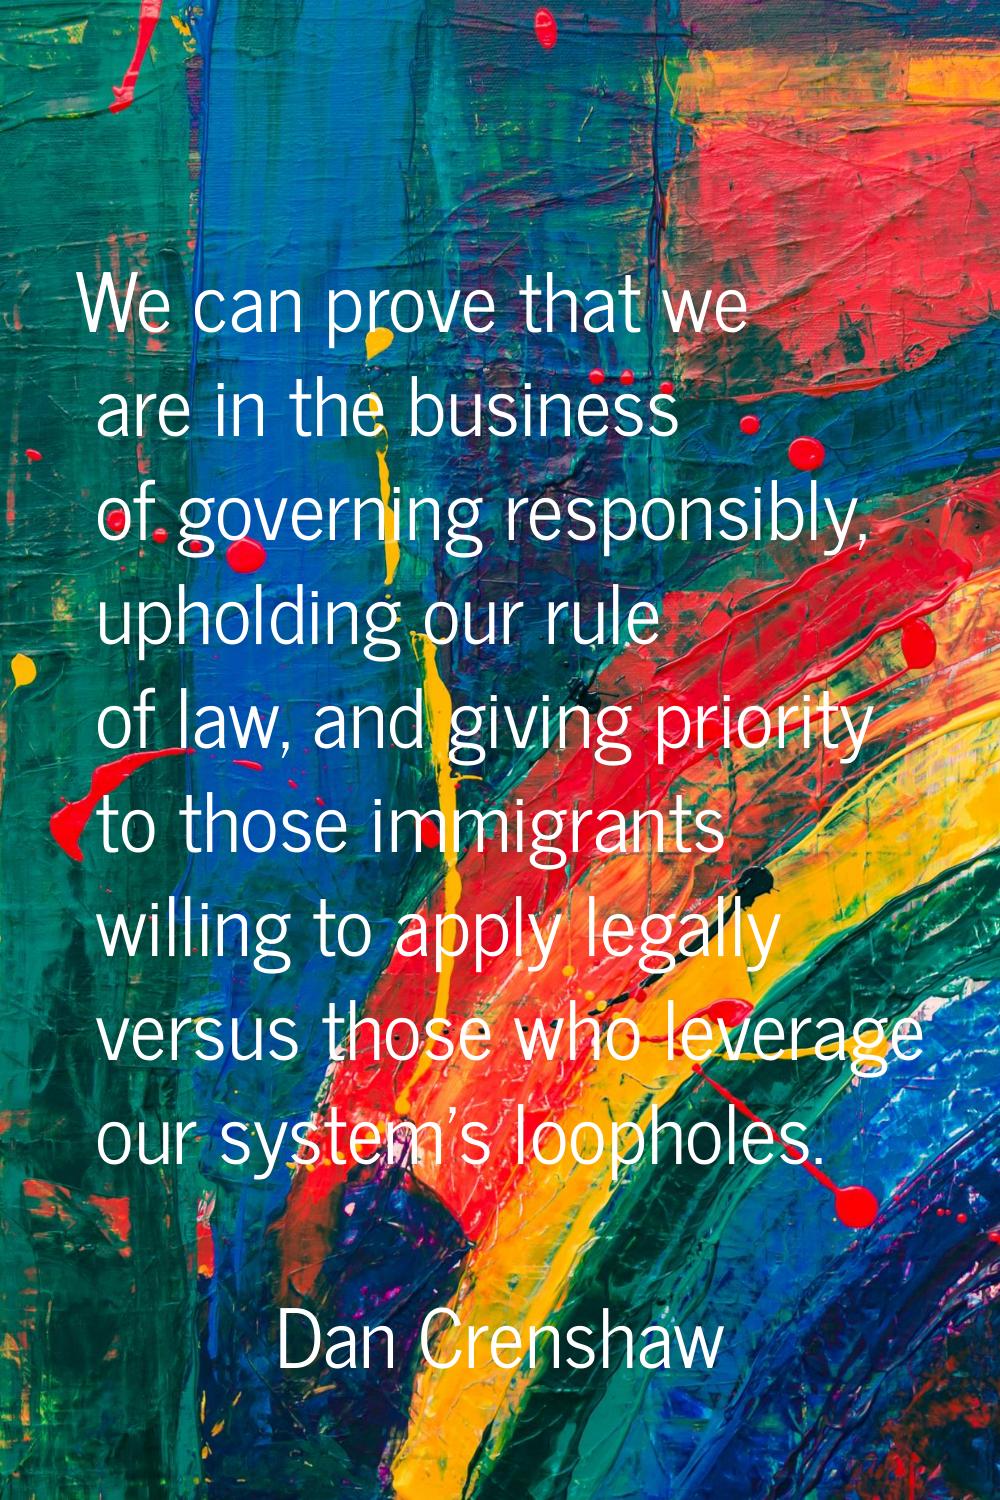 We can prove that we are in the business of governing responsibly, upholding our rule of law, and g